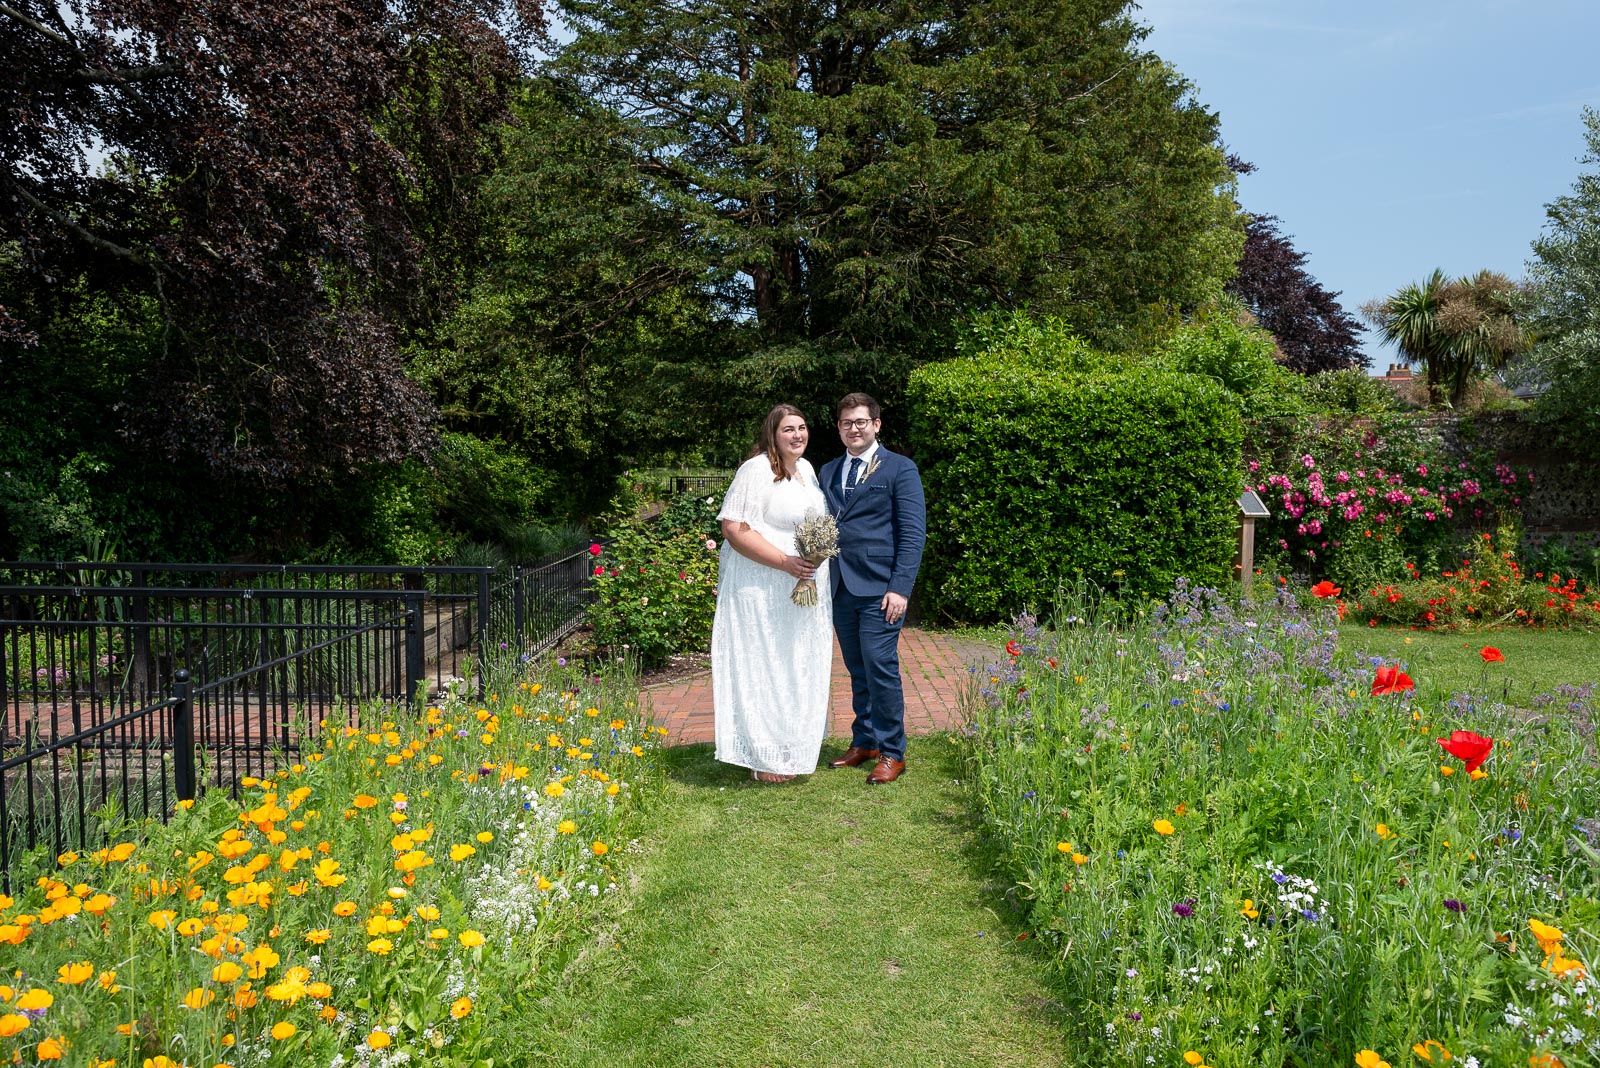 Sophie and Nathan pose inbetween the Summer blooms in Southover Grange after their wedding in Lewes Register Office.